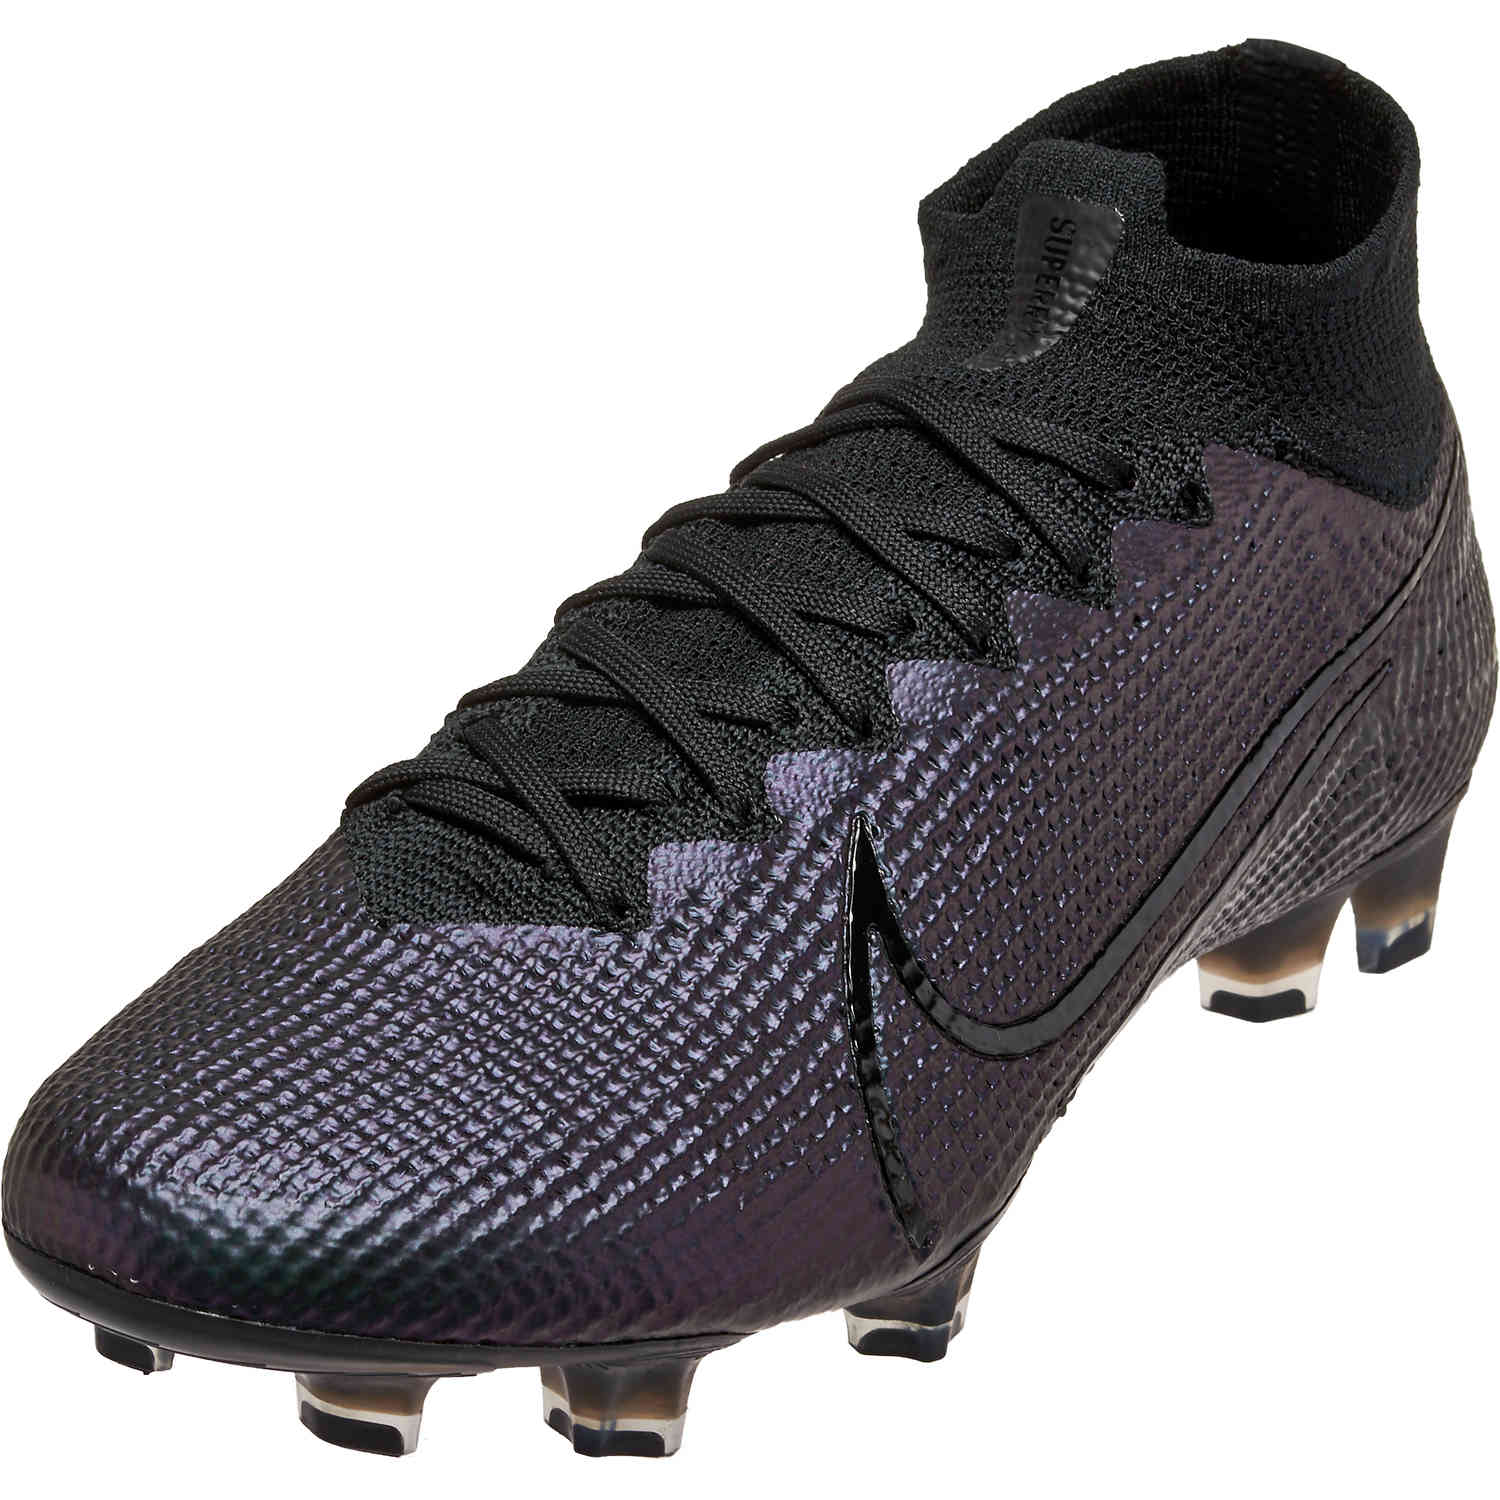 black superfly cleats